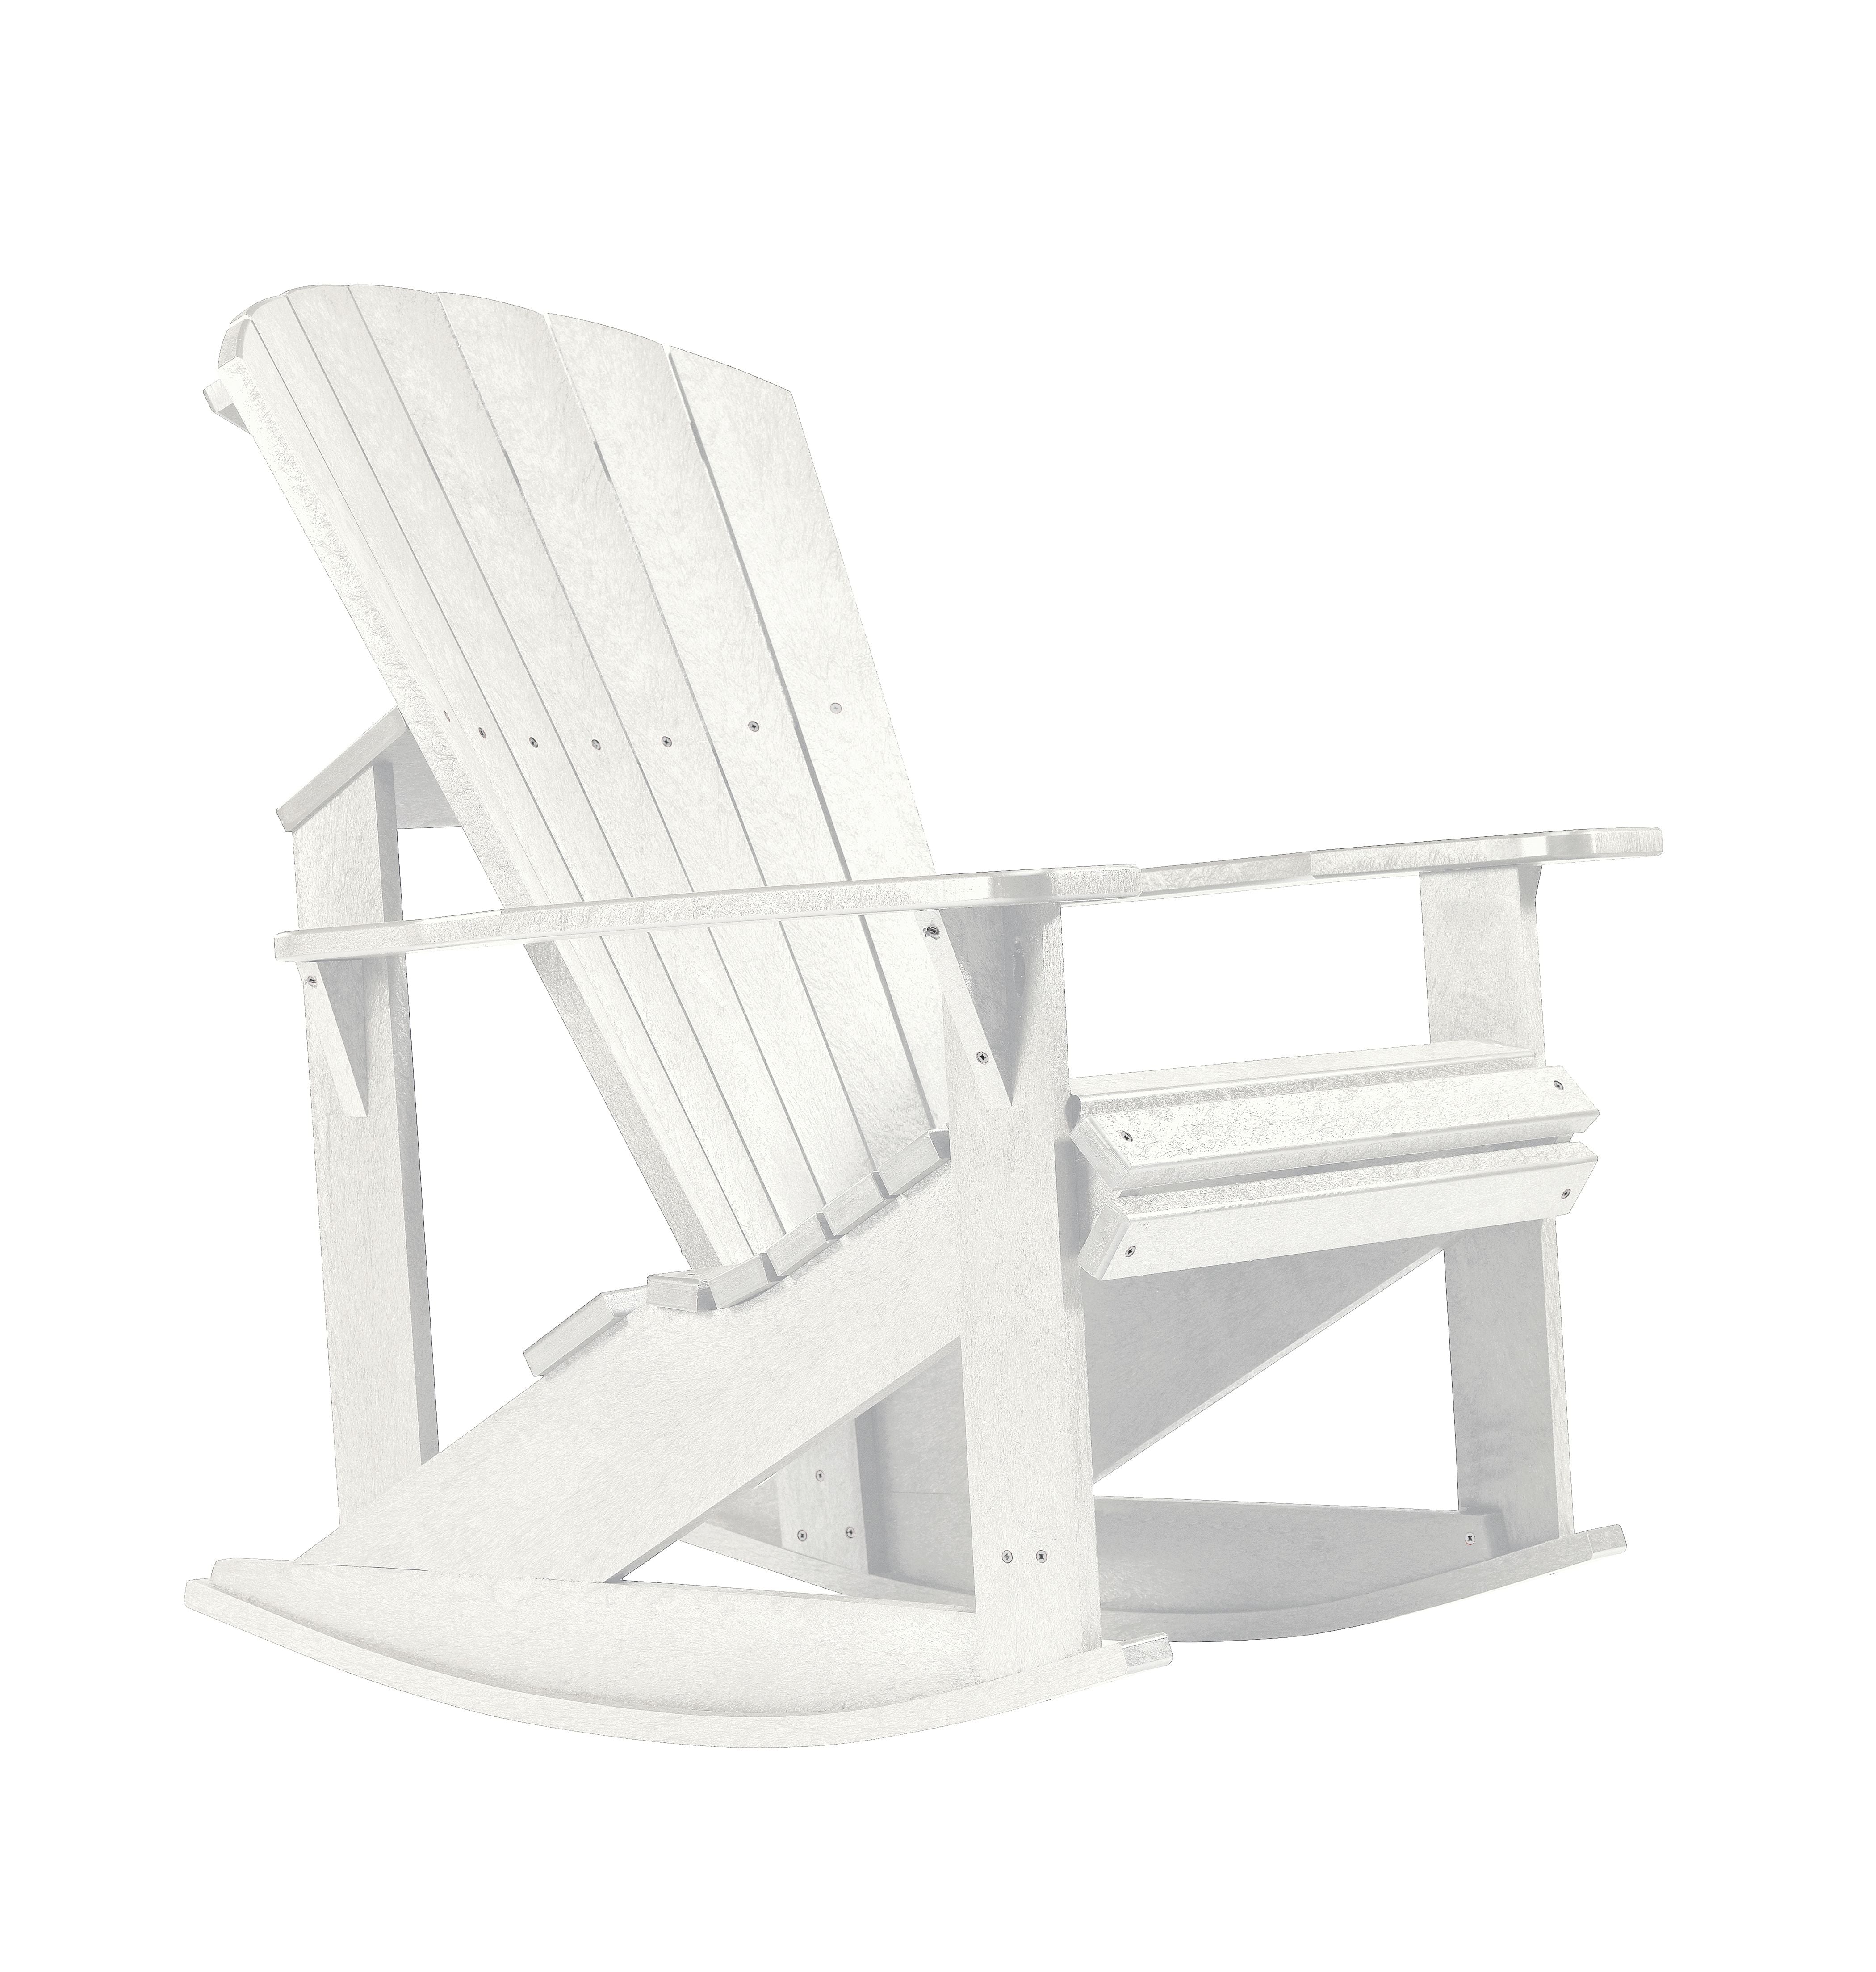 C.R. Plastic Products Adirondack Rockers Outdoor Chairs